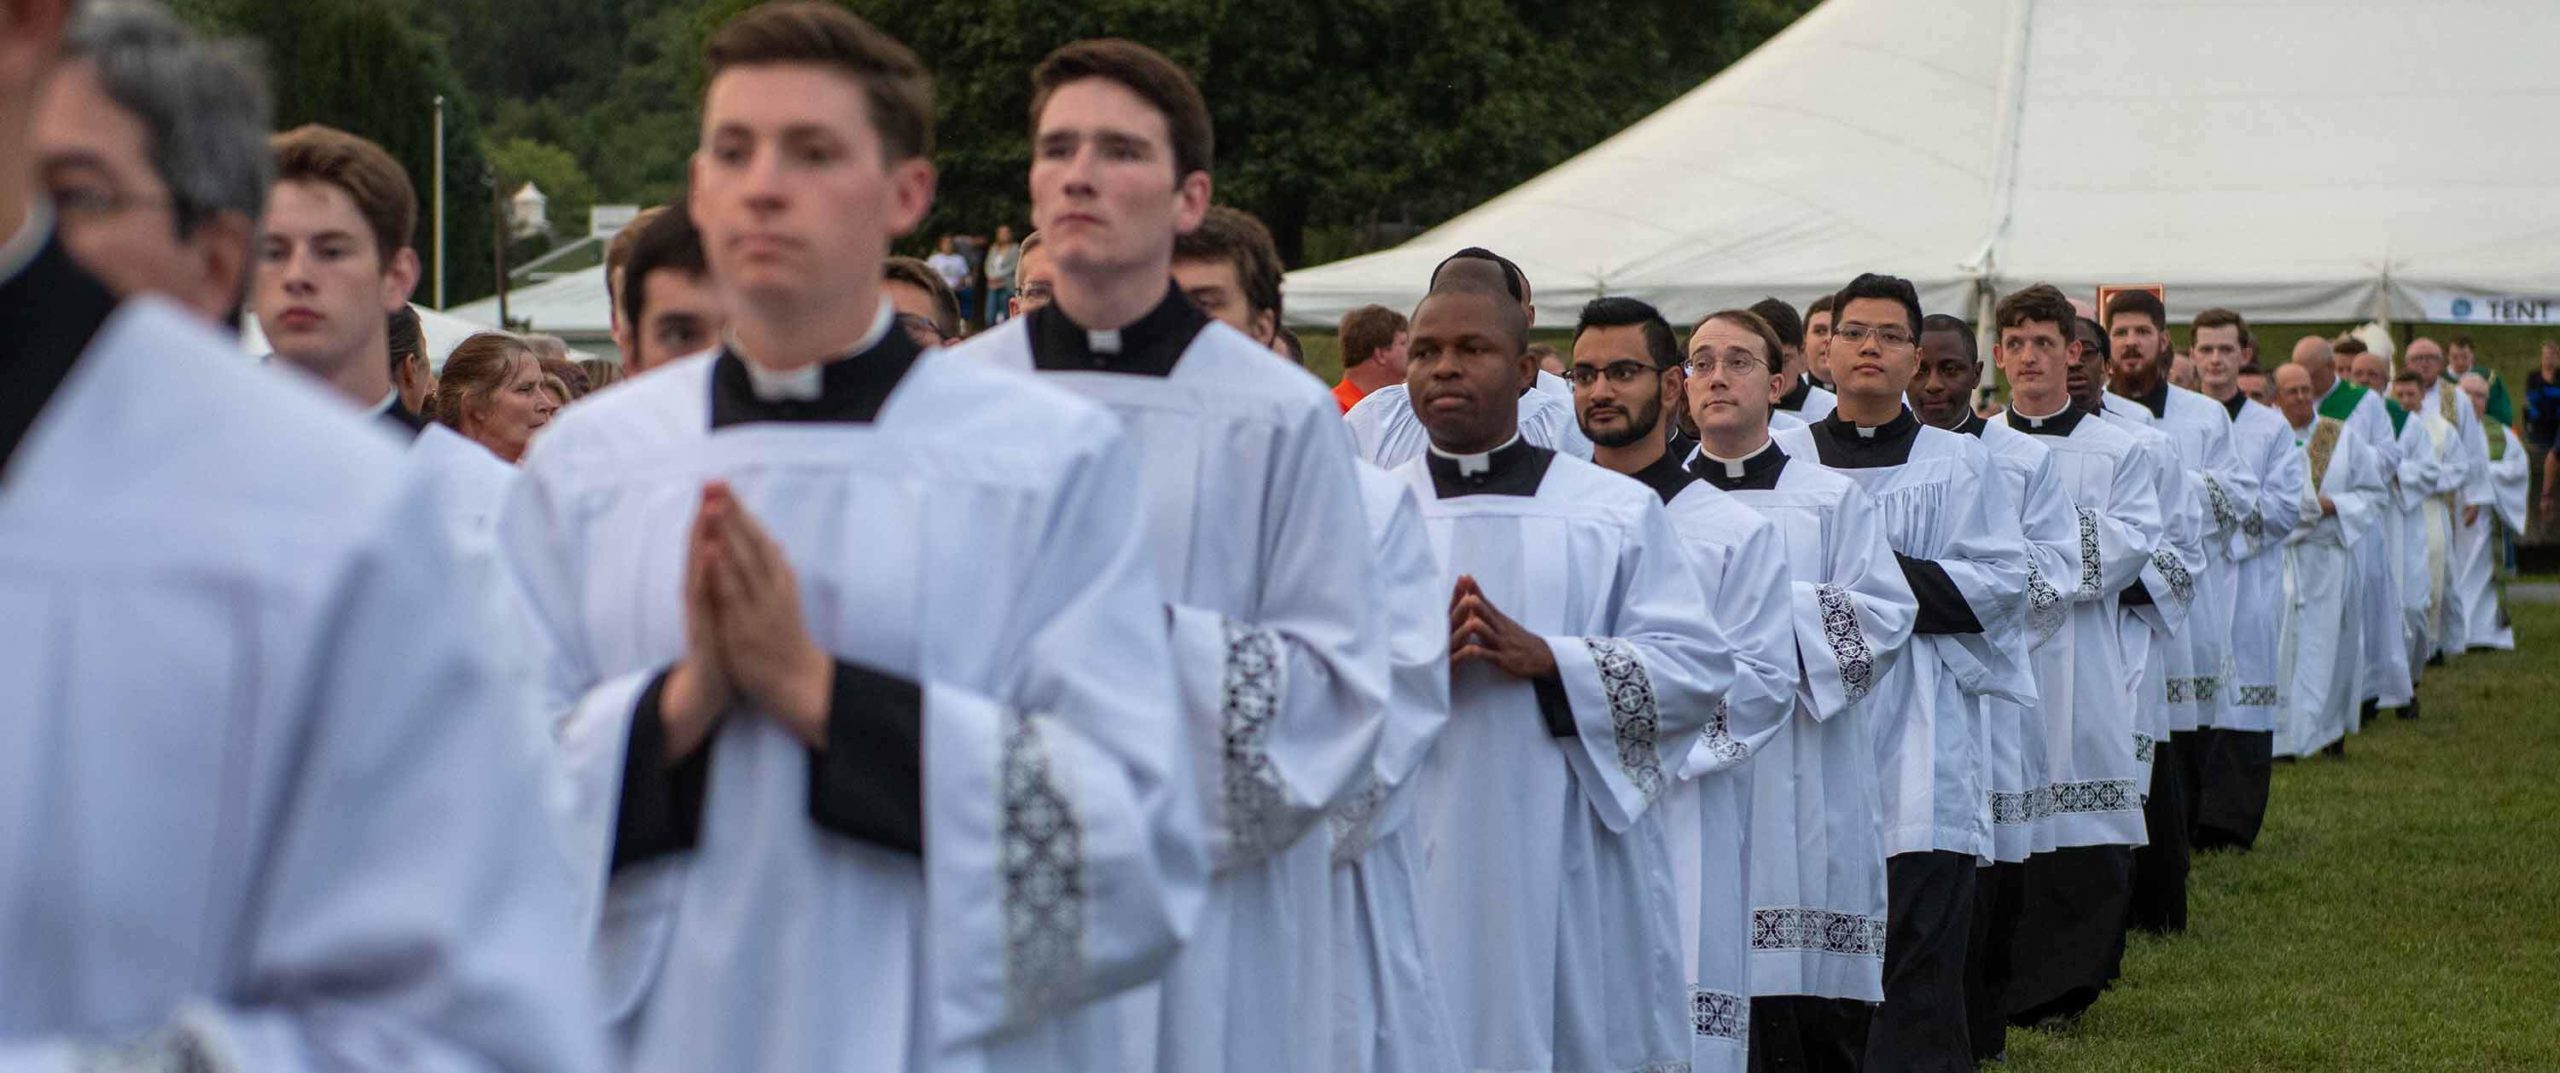 archdiocese-welcomes-17-new-seminarians-largest-group-in-at-least-36